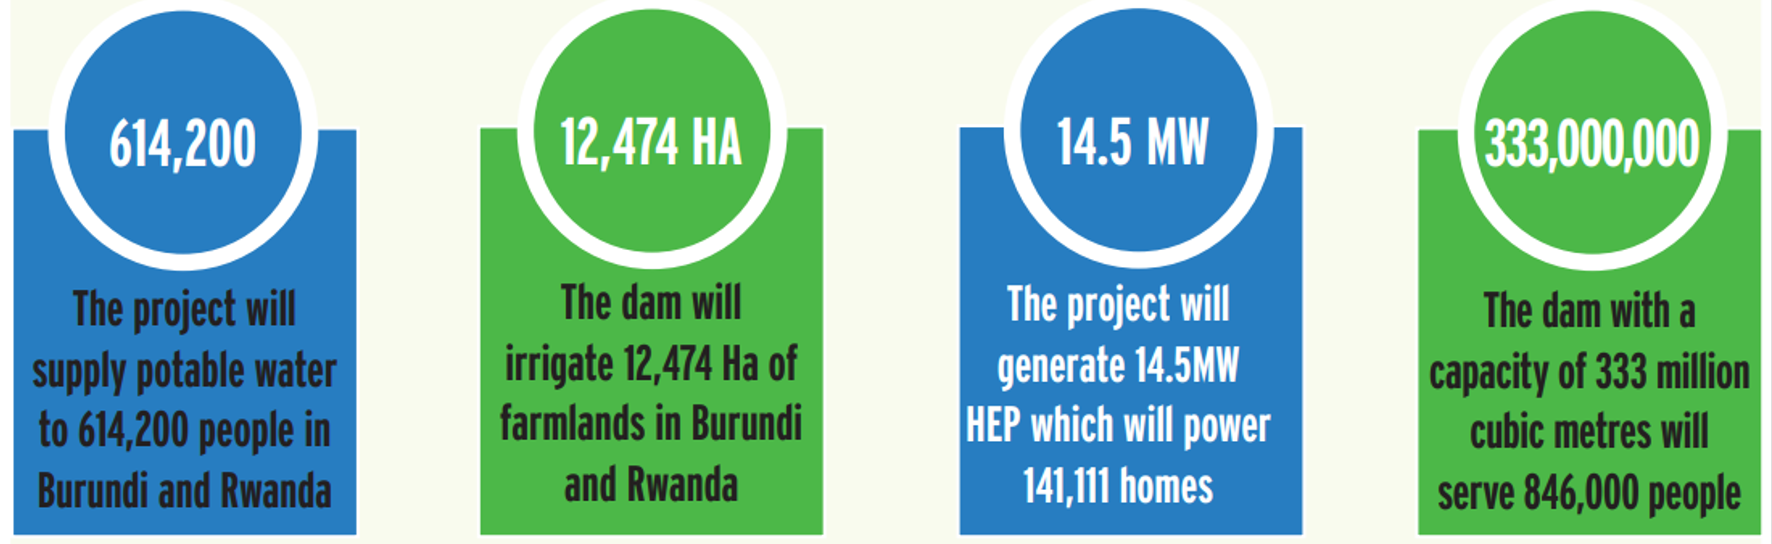 The Akanyaru Project in Numbers